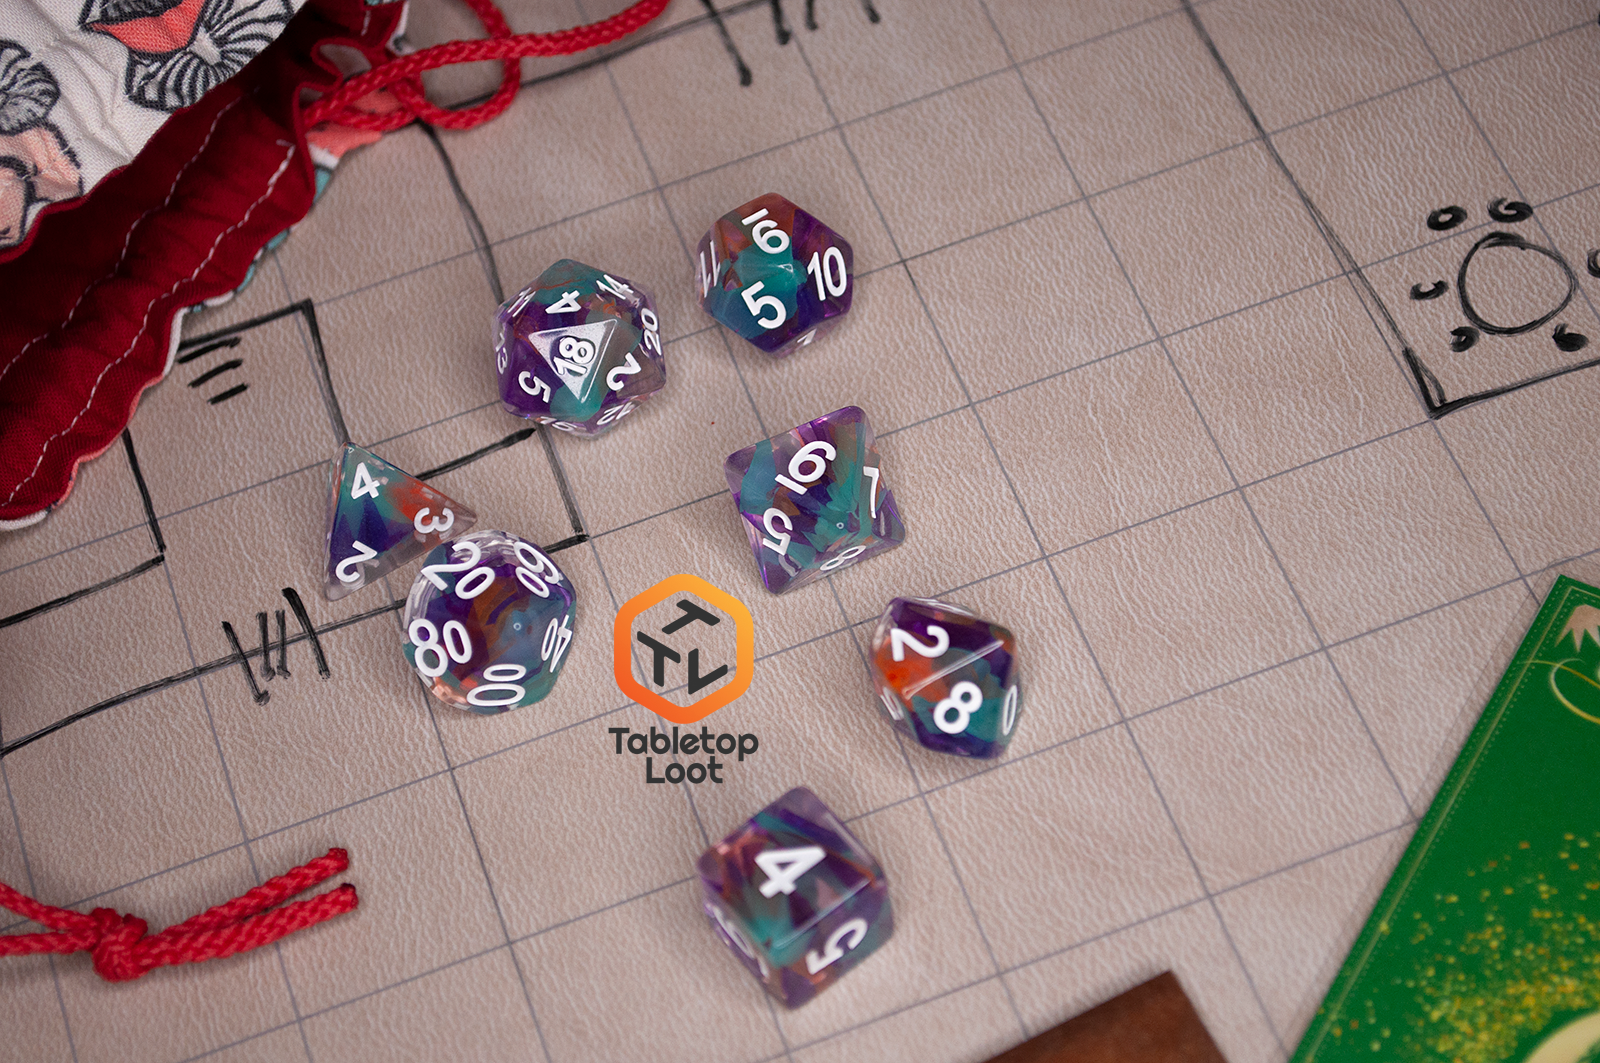 The Raise the Banners 7 piece dice set with swirls of orange, blue, and purple in clear resin.